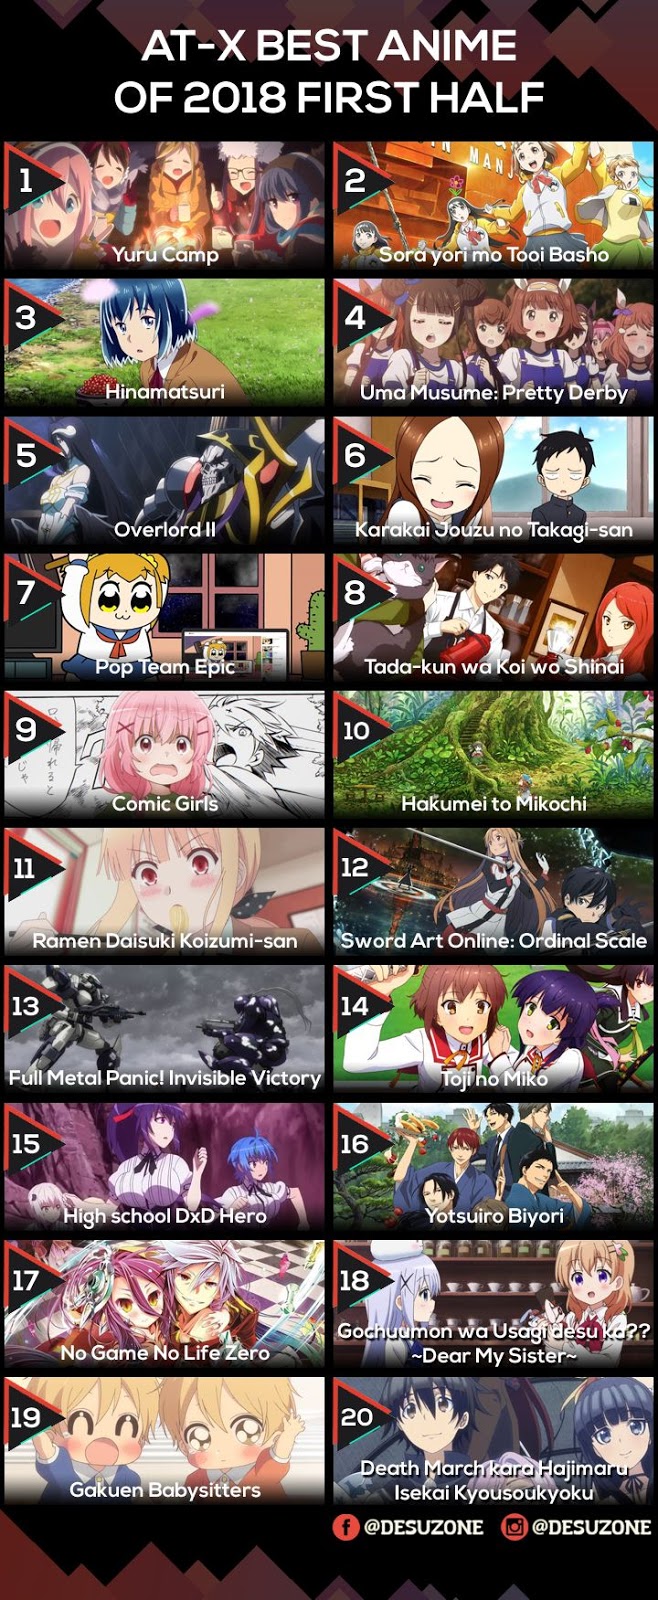 AT-X Best Anime Chart of 2018 First Half Chart